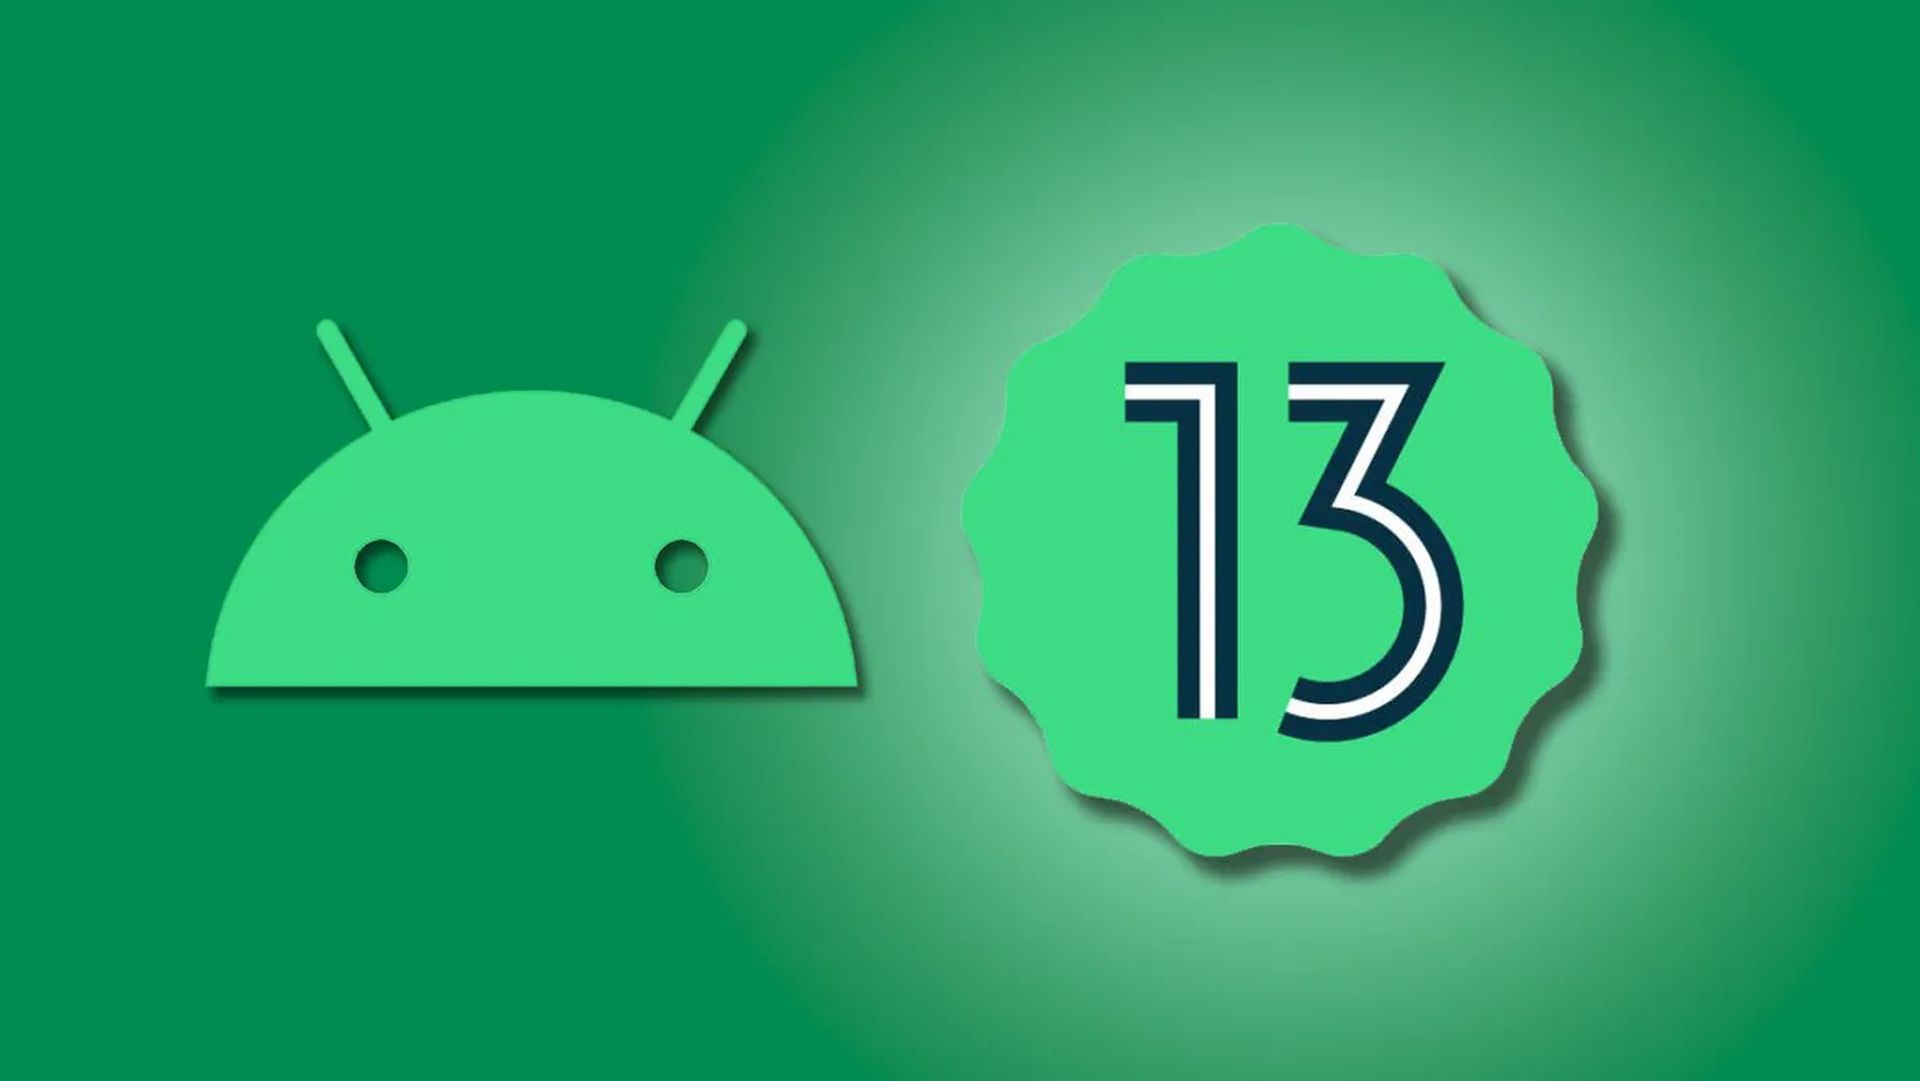 Today we are going to be explaining new Android 13 features. Early in February, Google's first developer preview of Android 13 arrived, giving us a sneak...